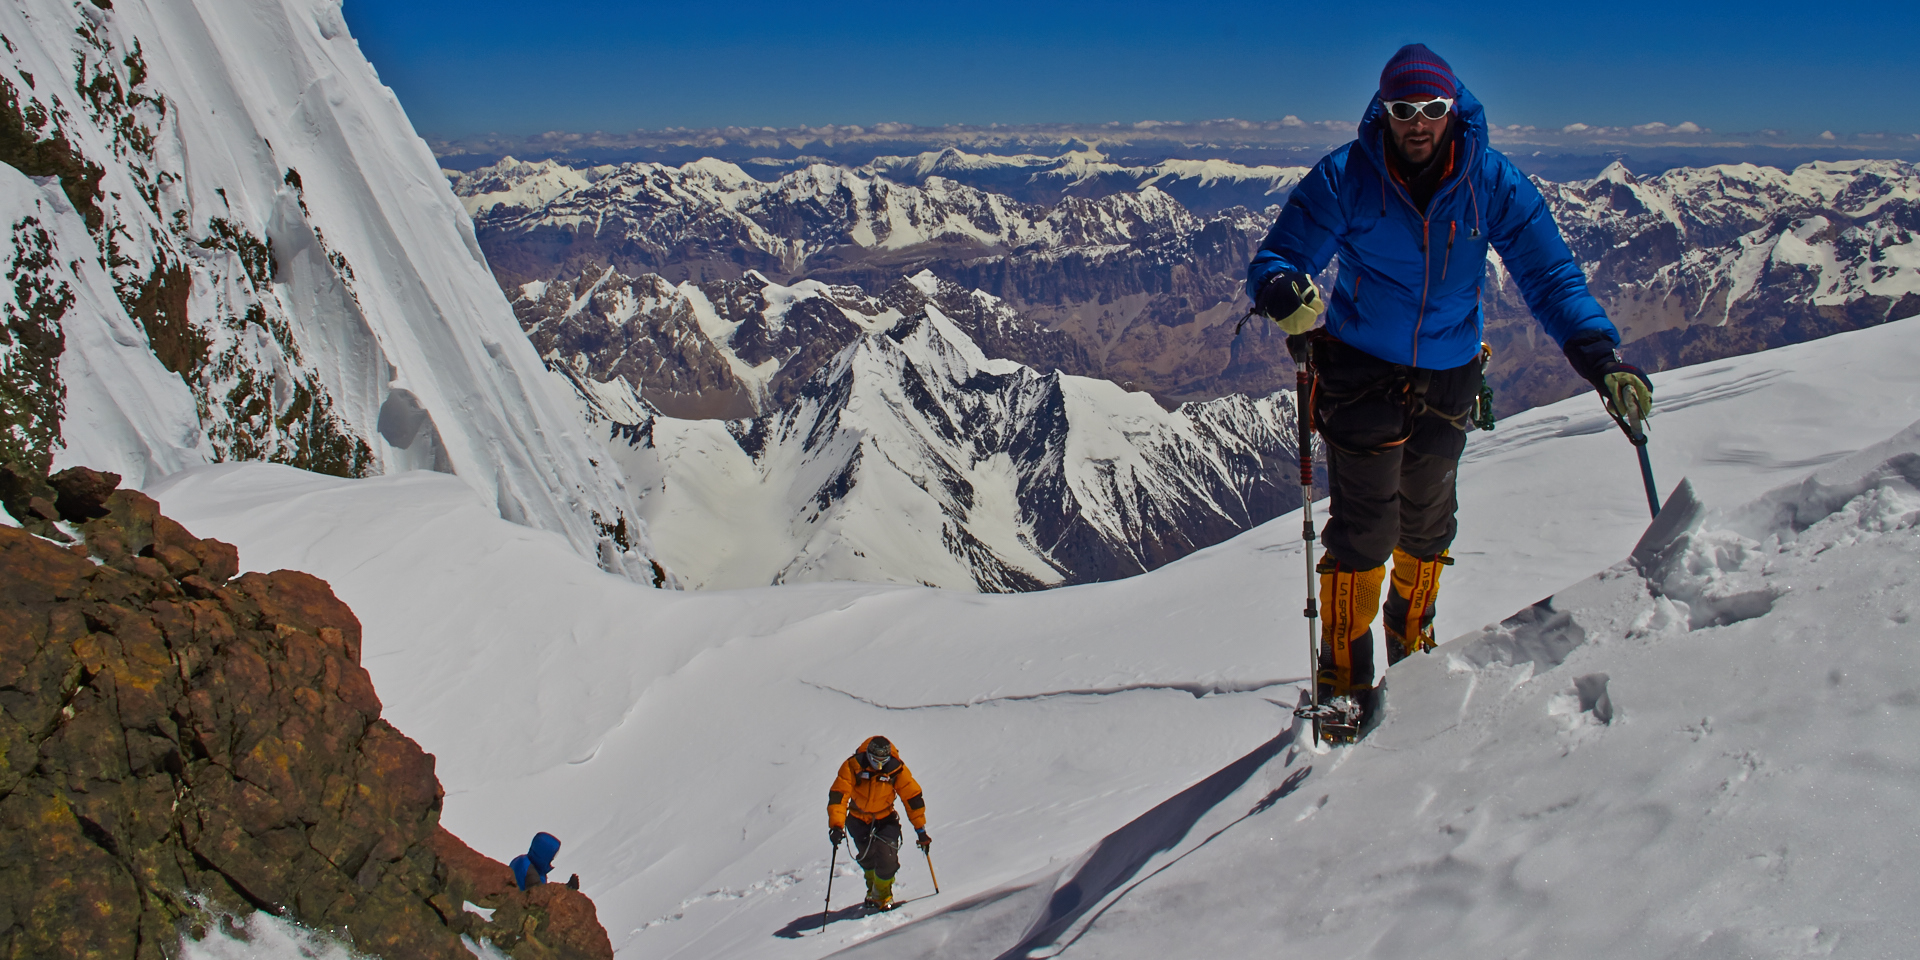 8000m mountaineering at Broad Peak, ascent 2014 with Felix Berg